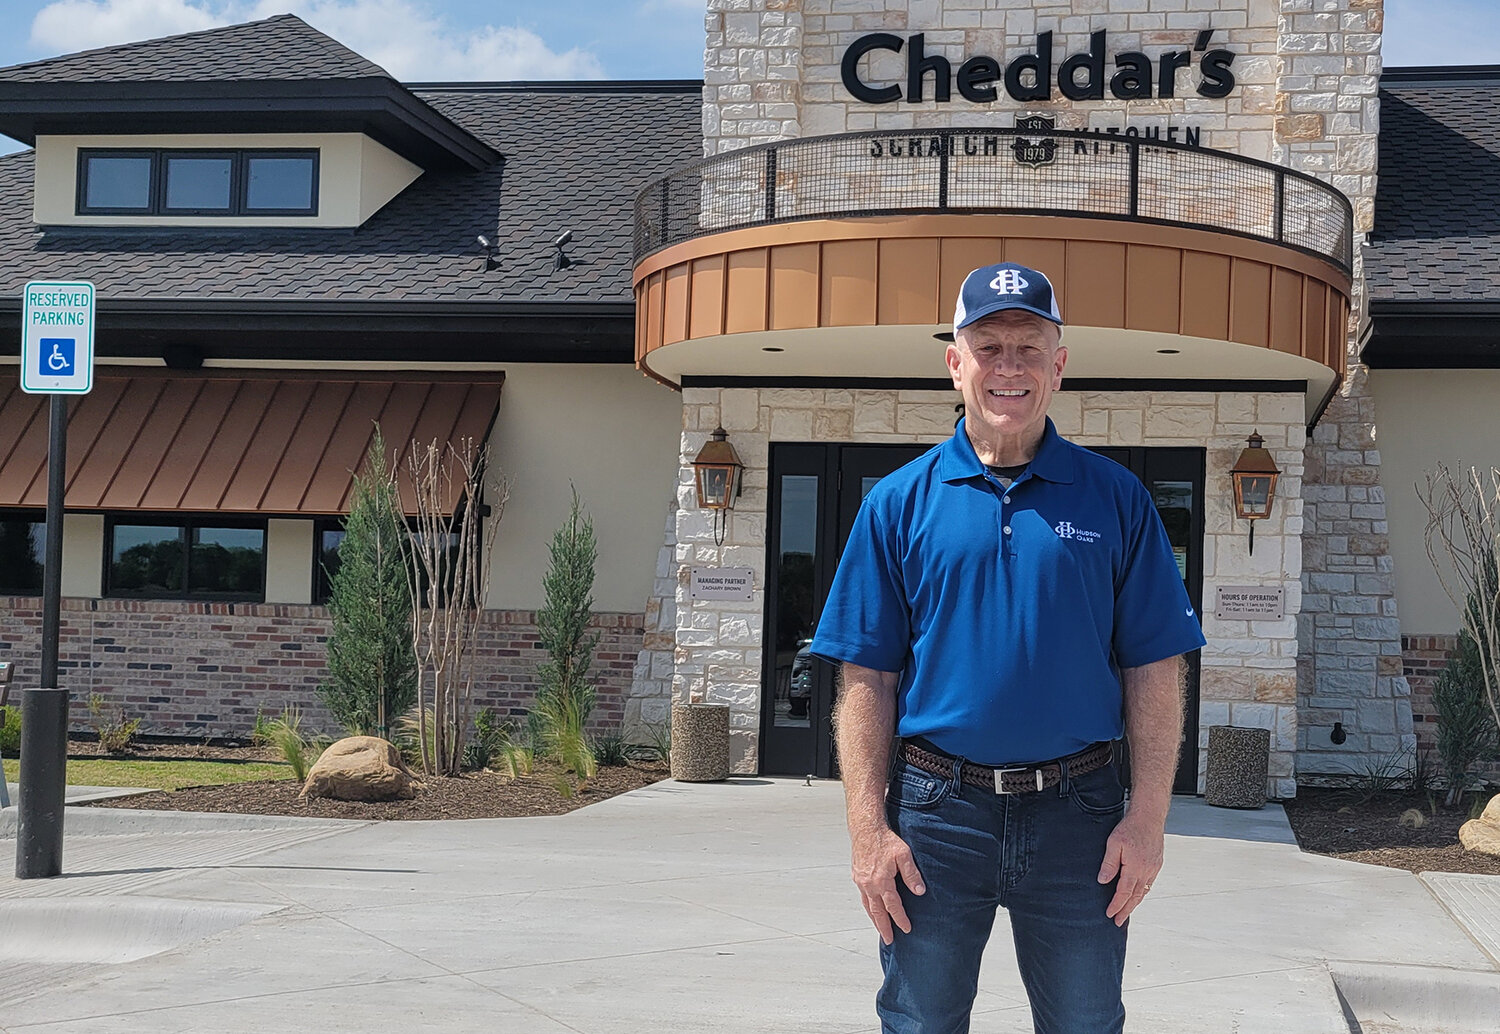 Hudson Oaks Mayor Tom Fitzpatrick stands in front of the new Cheddar's restaurant, one of many businesses that are finding their way to this small Parker County city.